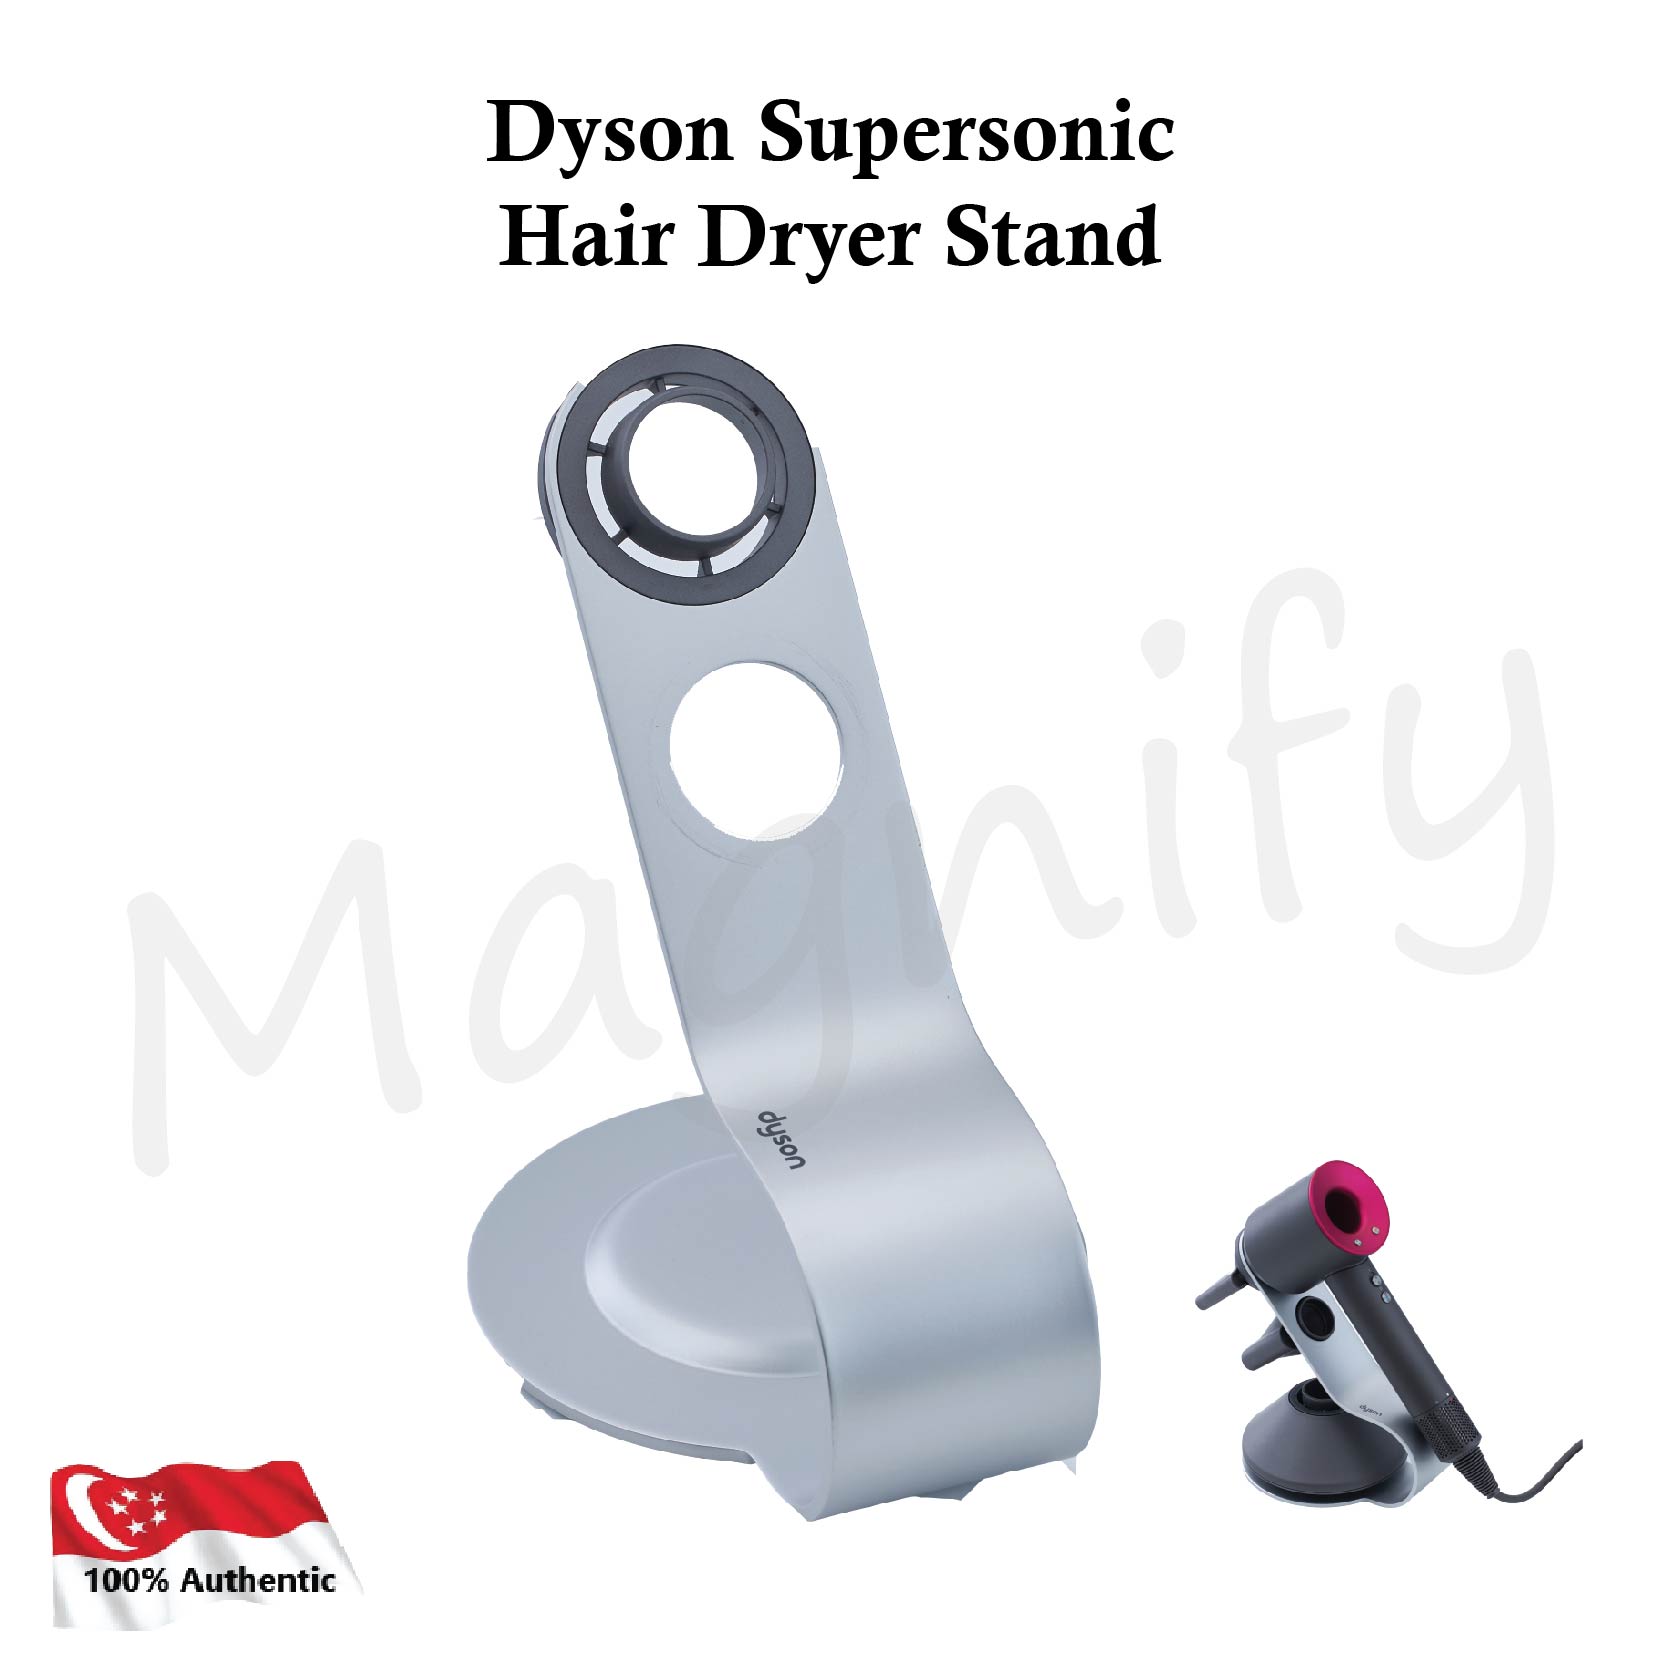 Dyson Supersonic Hair Dryer Stand | Lazada Singapore